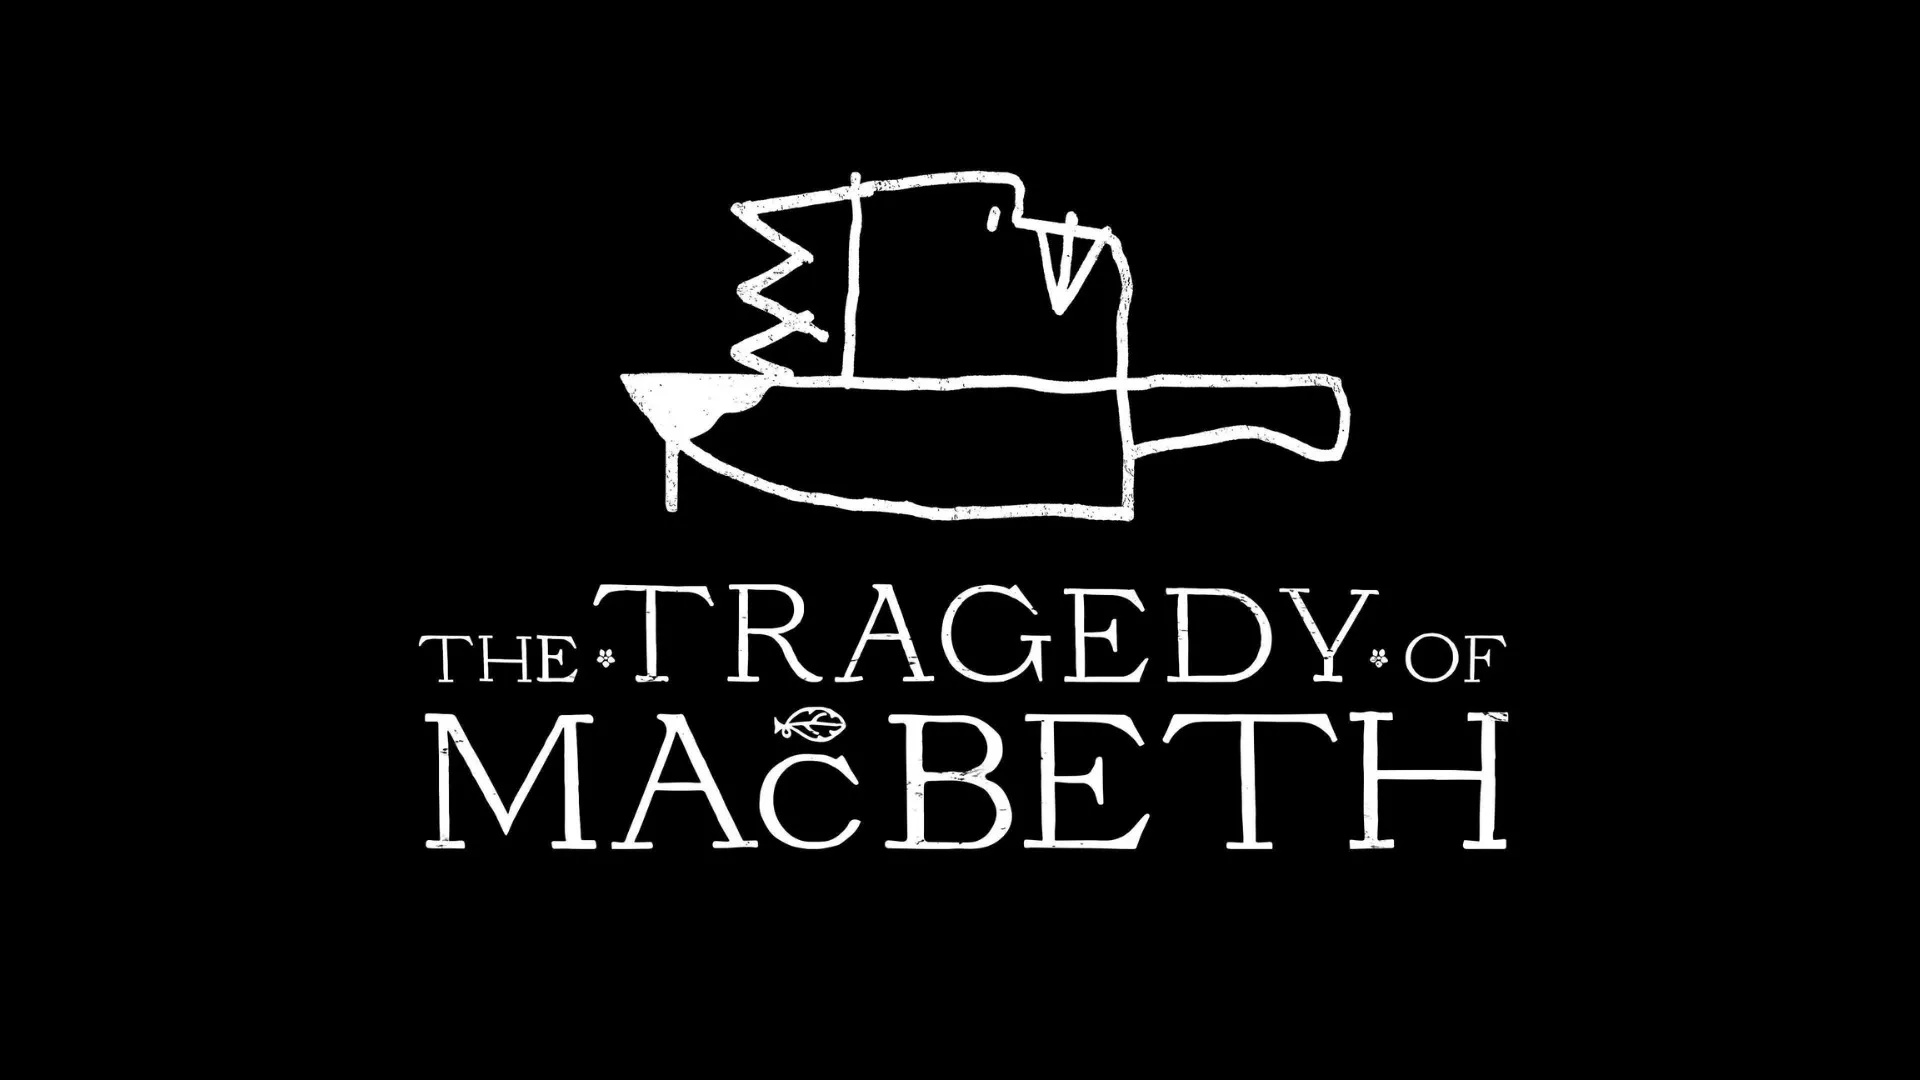 The Tragedy of Macbeth review, NYFF59 premiere, Knockturnal critique, Cinematic excellence, 1920x1080 Full HD Desktop